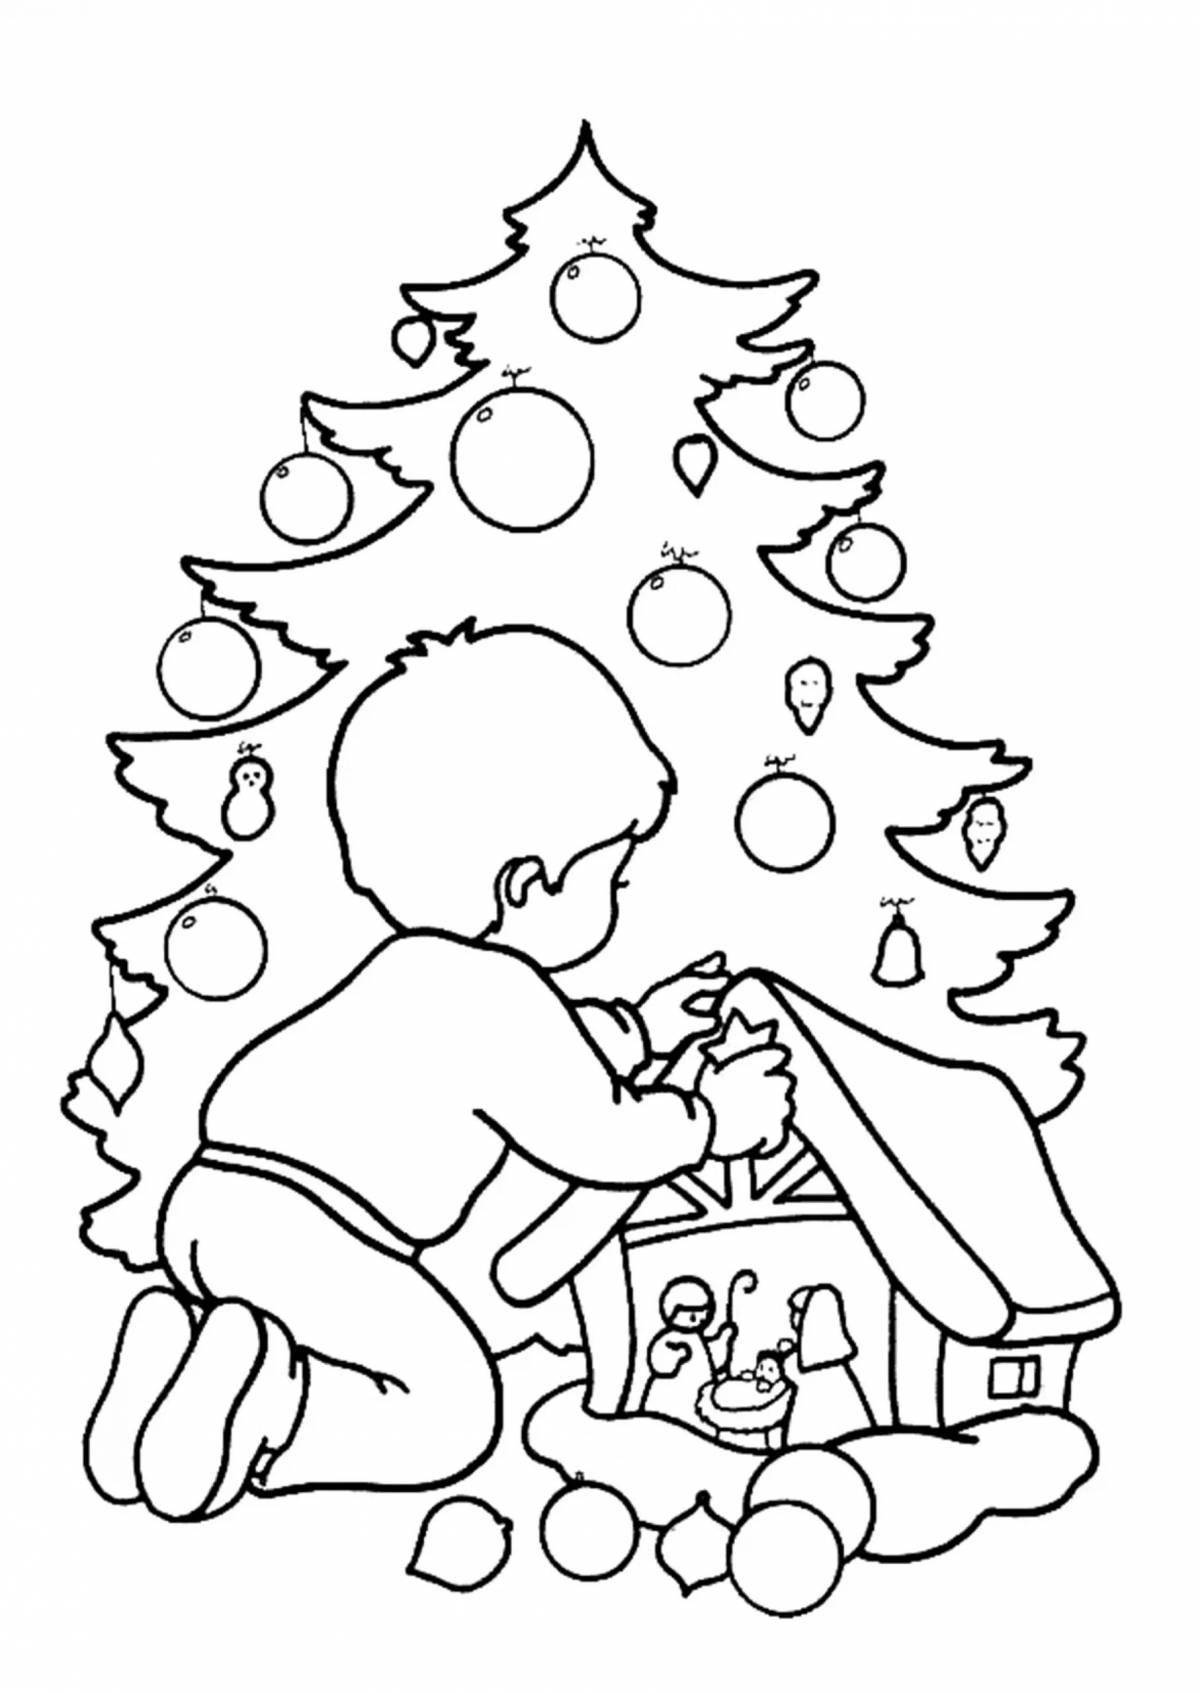 Playful coloring of a Christmas story